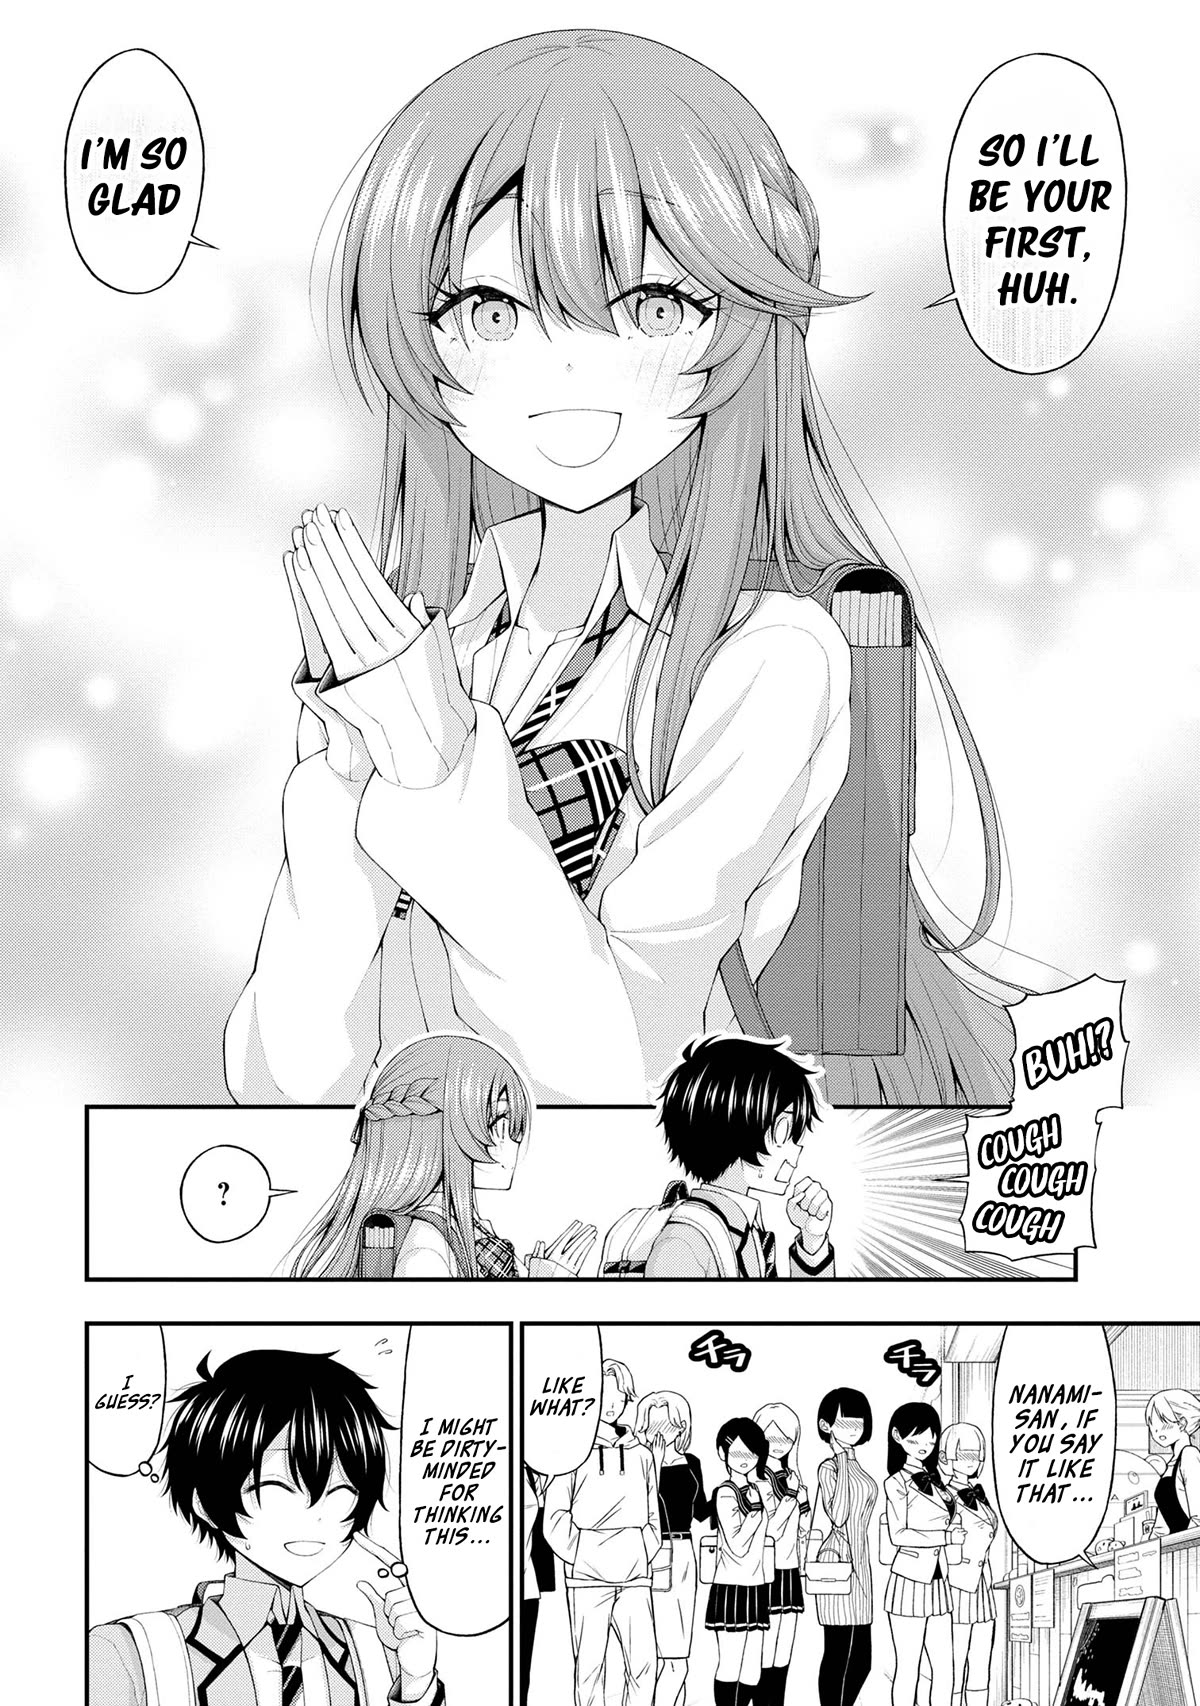 The Gal Who Was Meant to Confess to Me as a Game Punishment Has Apparently Fallen in Love with Me - chapter 14 - #2